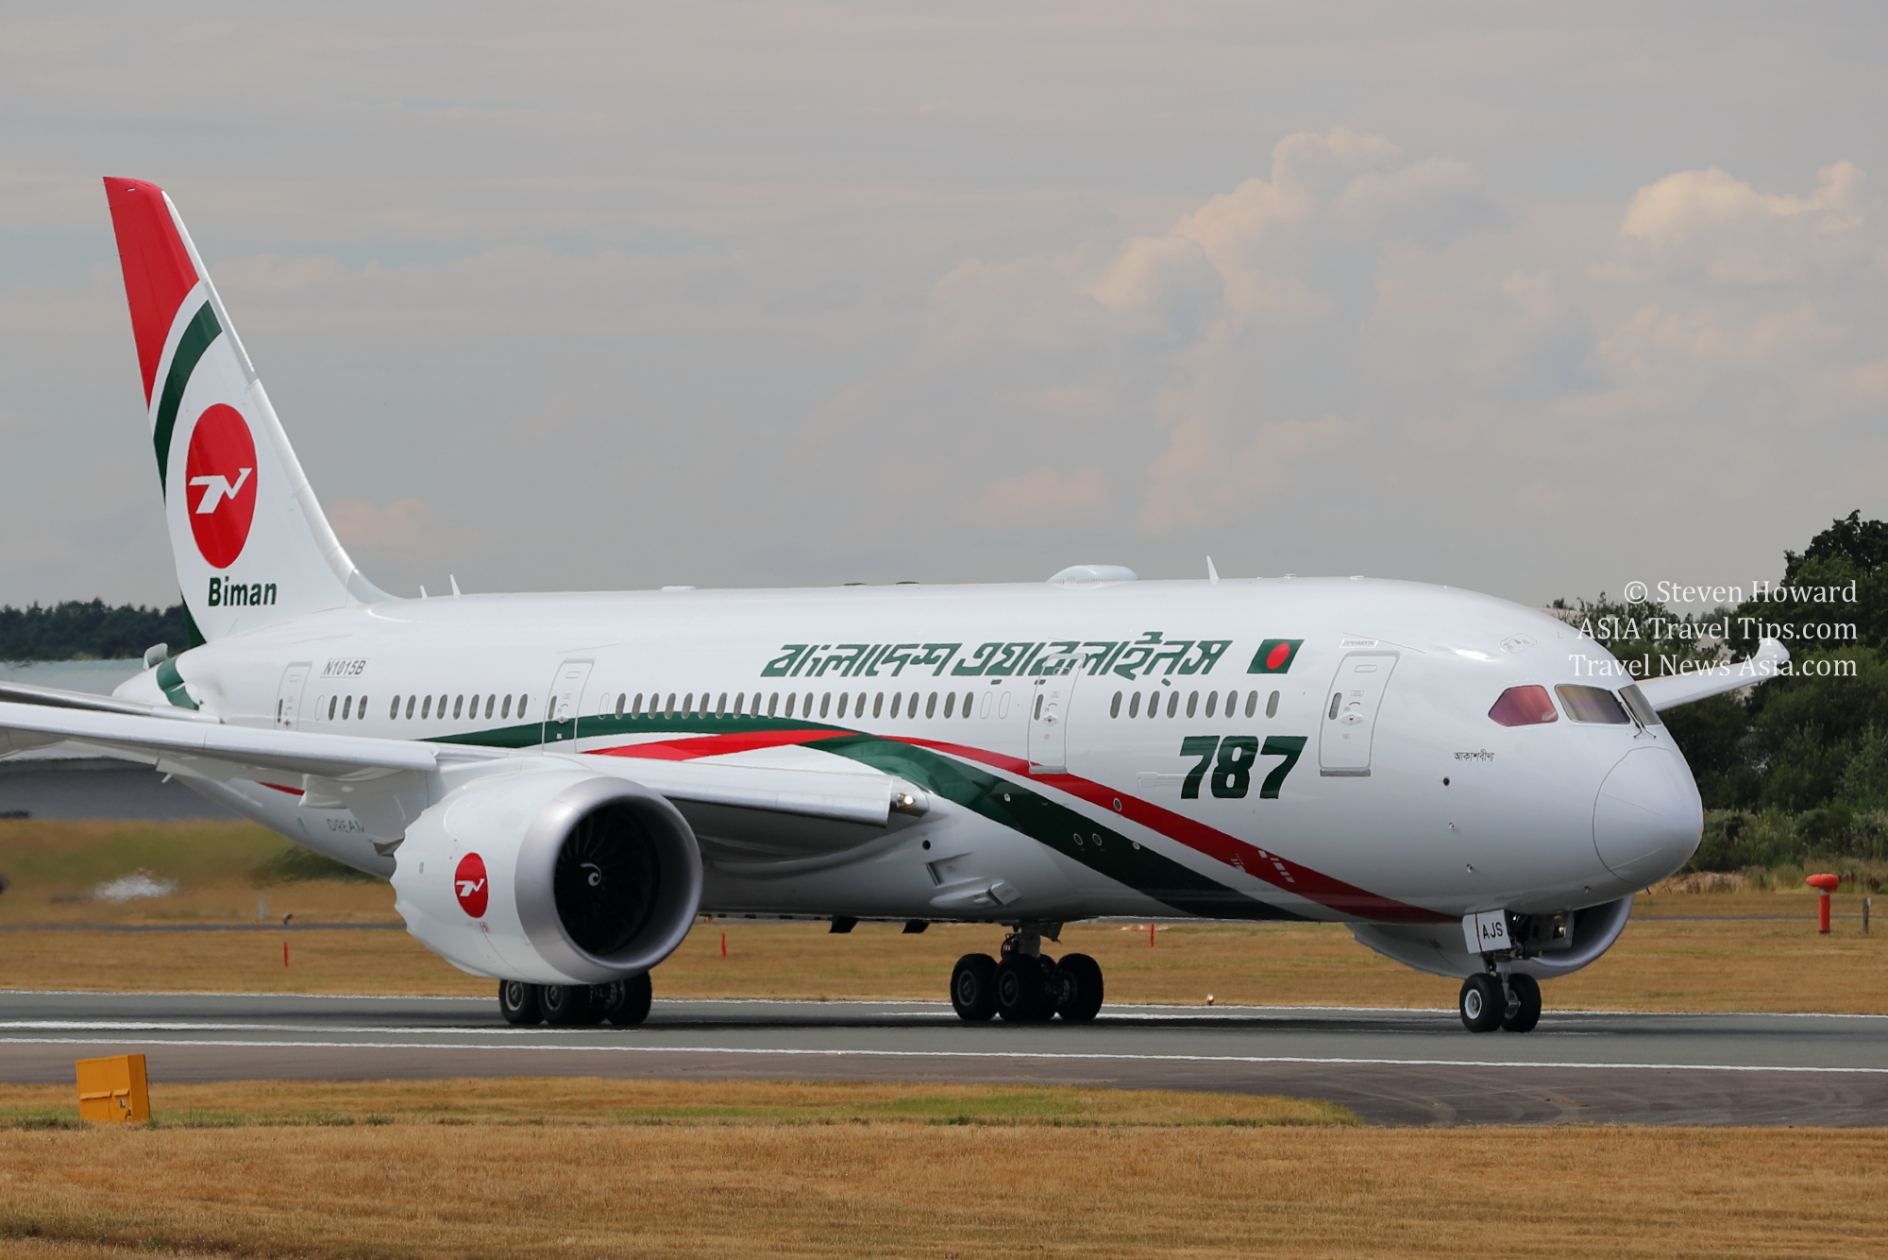 Biman Bangladesh Airlines Boeing 787. Picture by Steven Howard of TravelNewsAsia.com Click to enlarge.